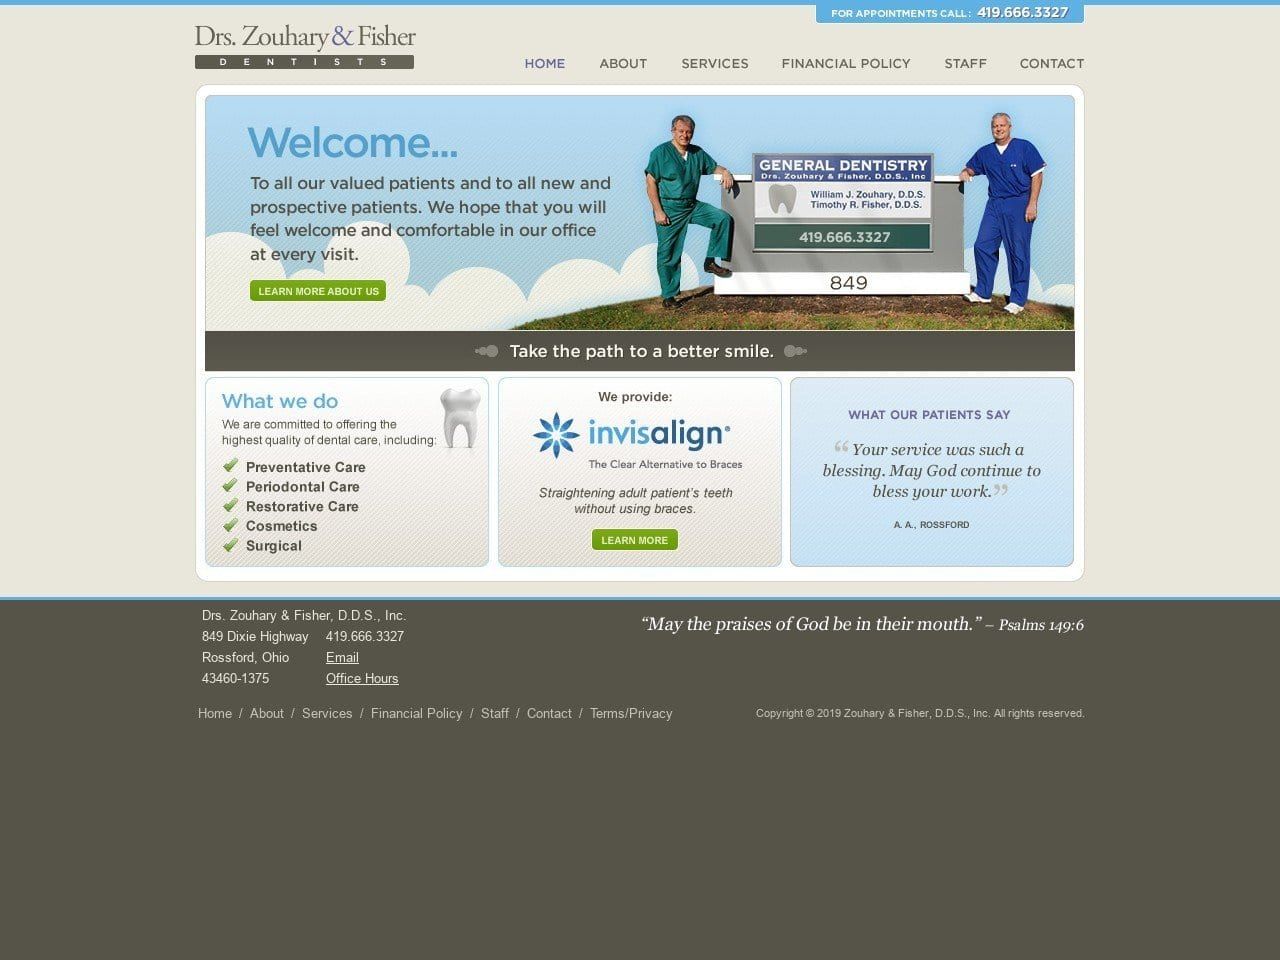 Zouhary & Fisher Inc Website Screenshot from zfdentists.com